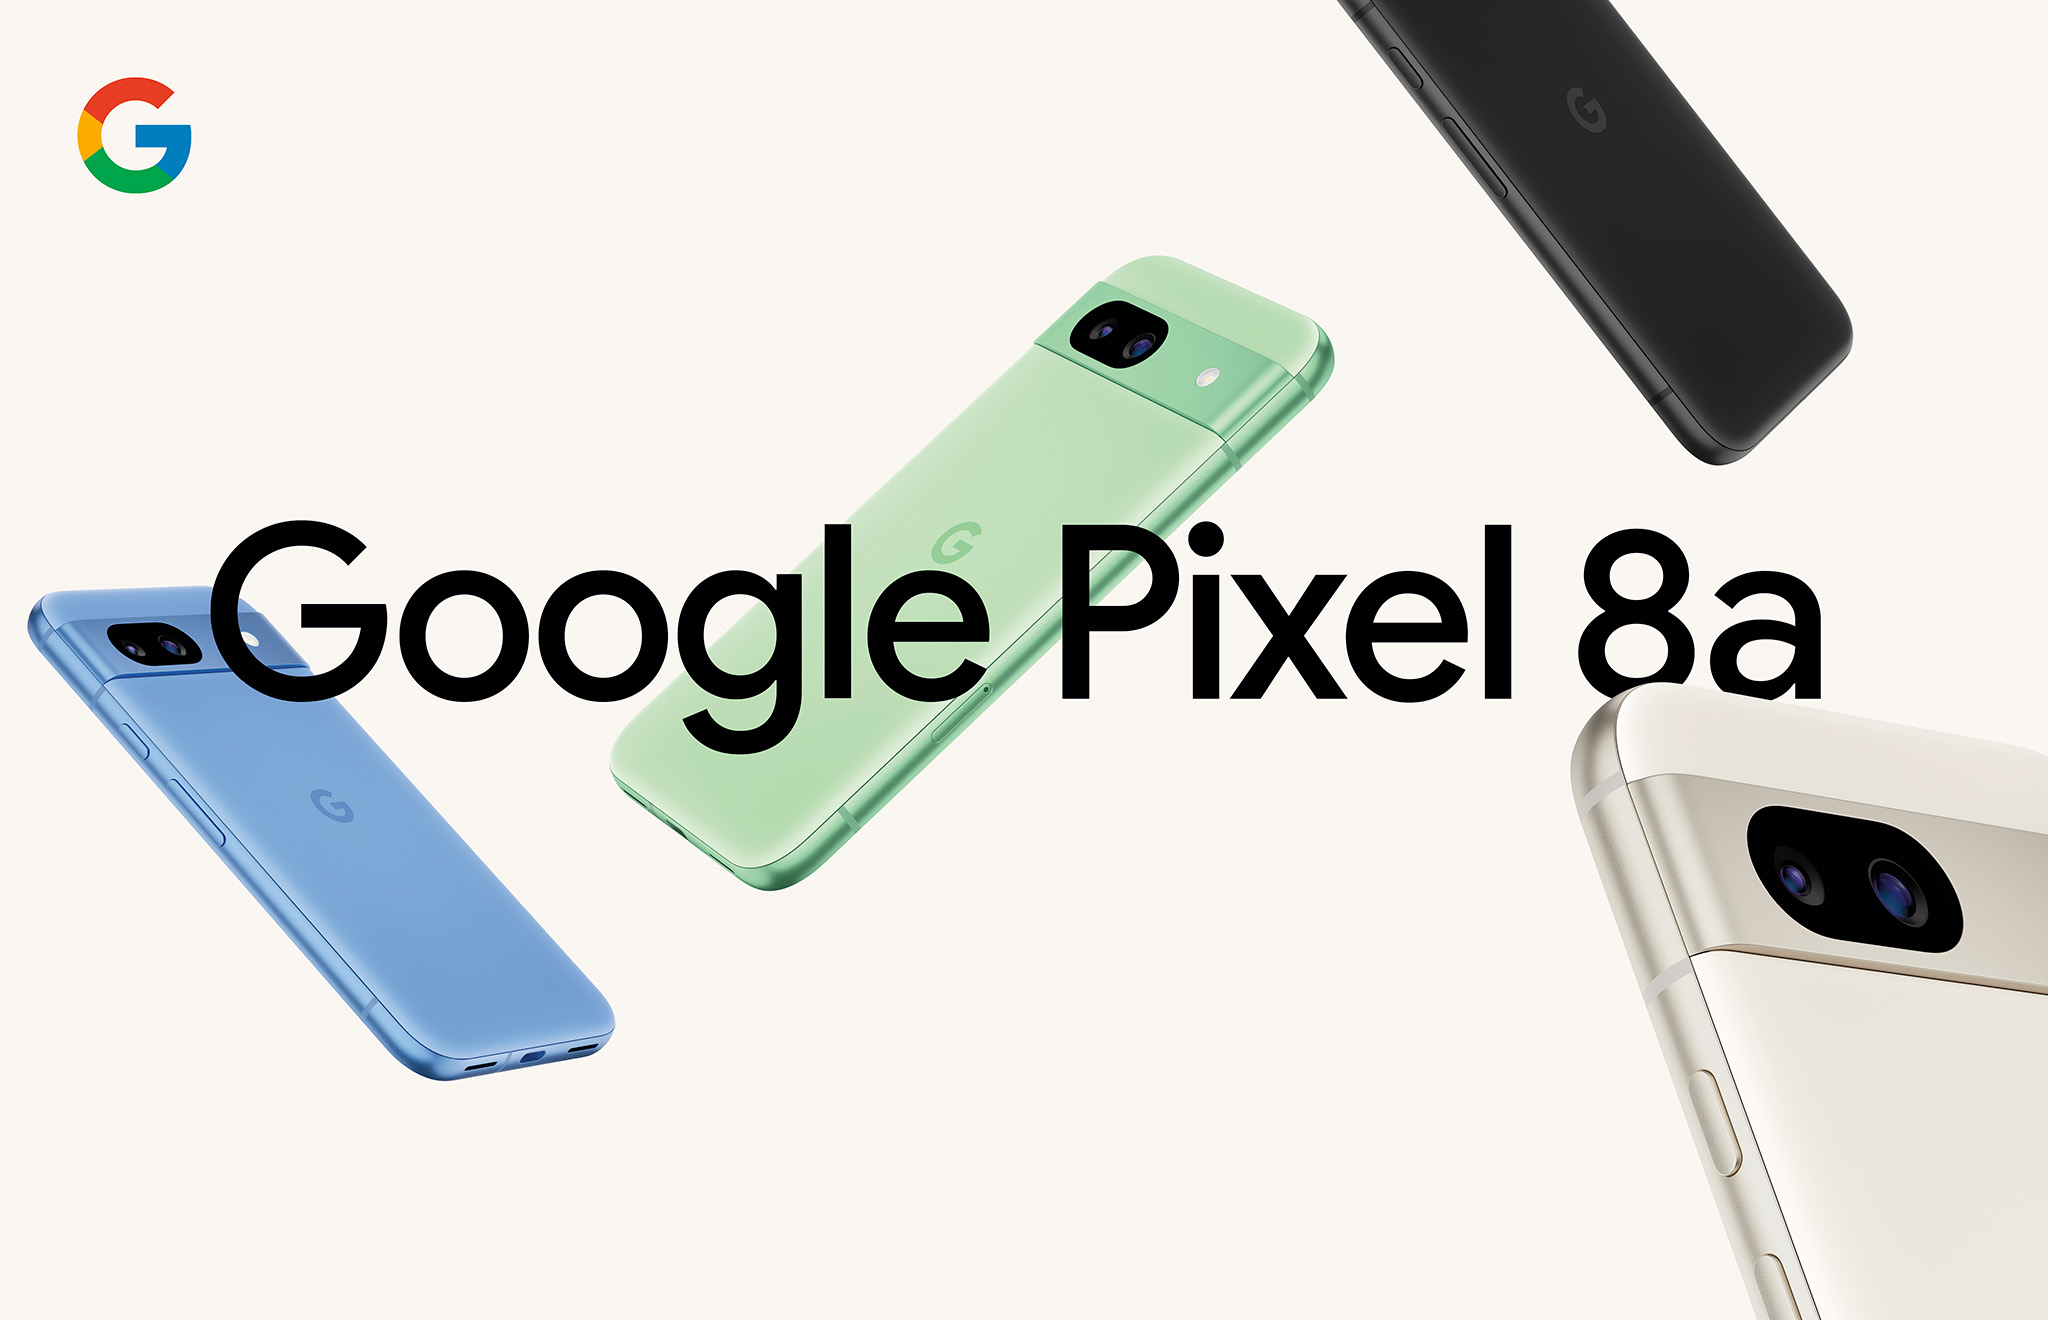 All color variants of the Google Pixel 8a arranged around the phone's name